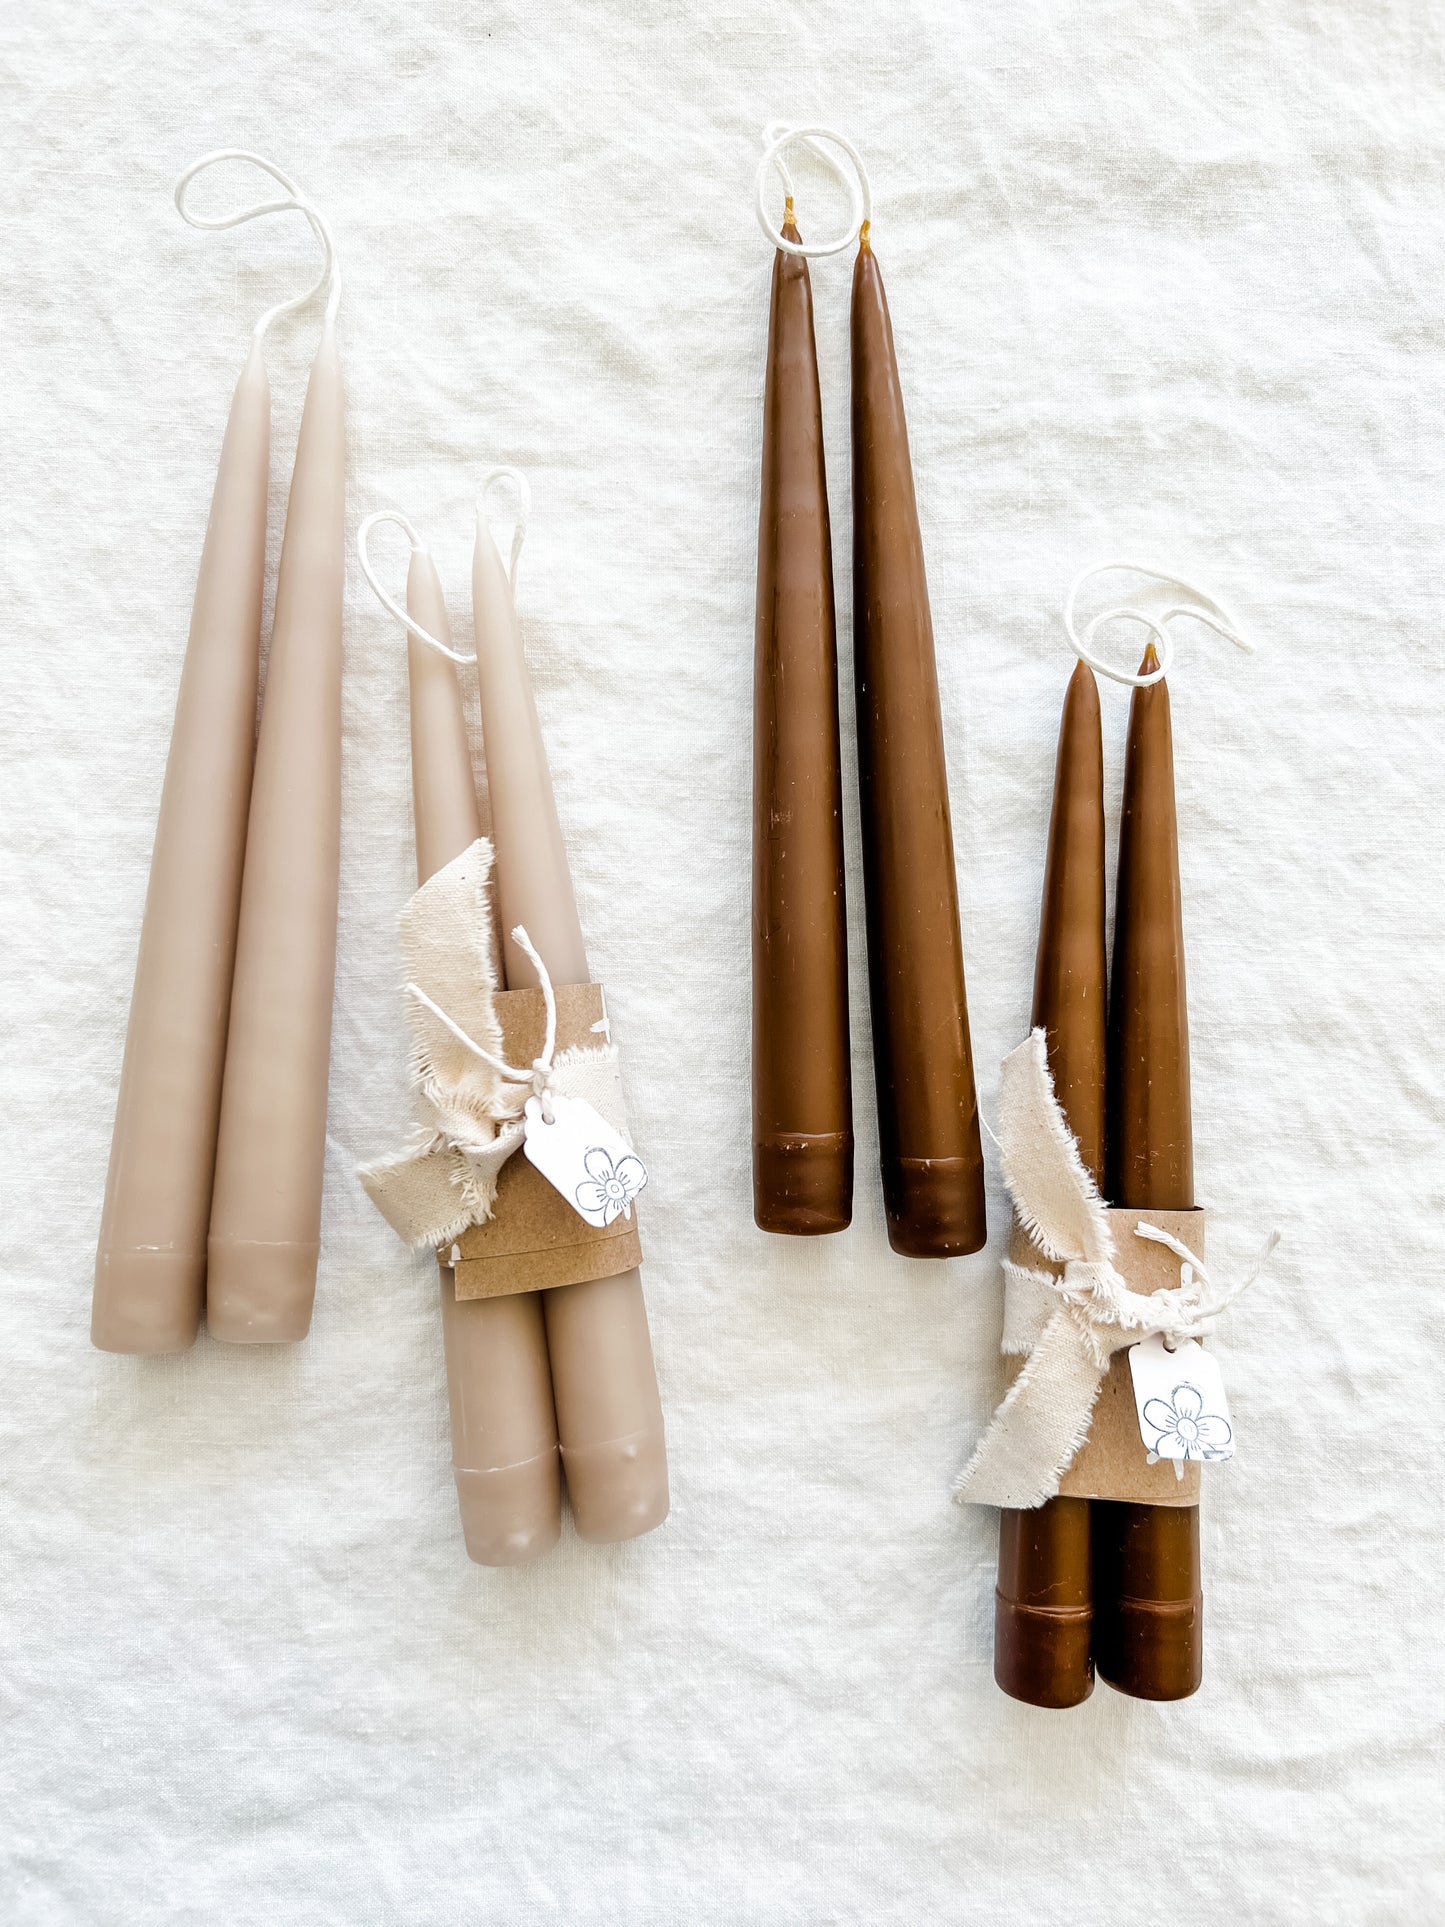 Hand-dipped Candles in the Scandinavian Tradition in Four Colors